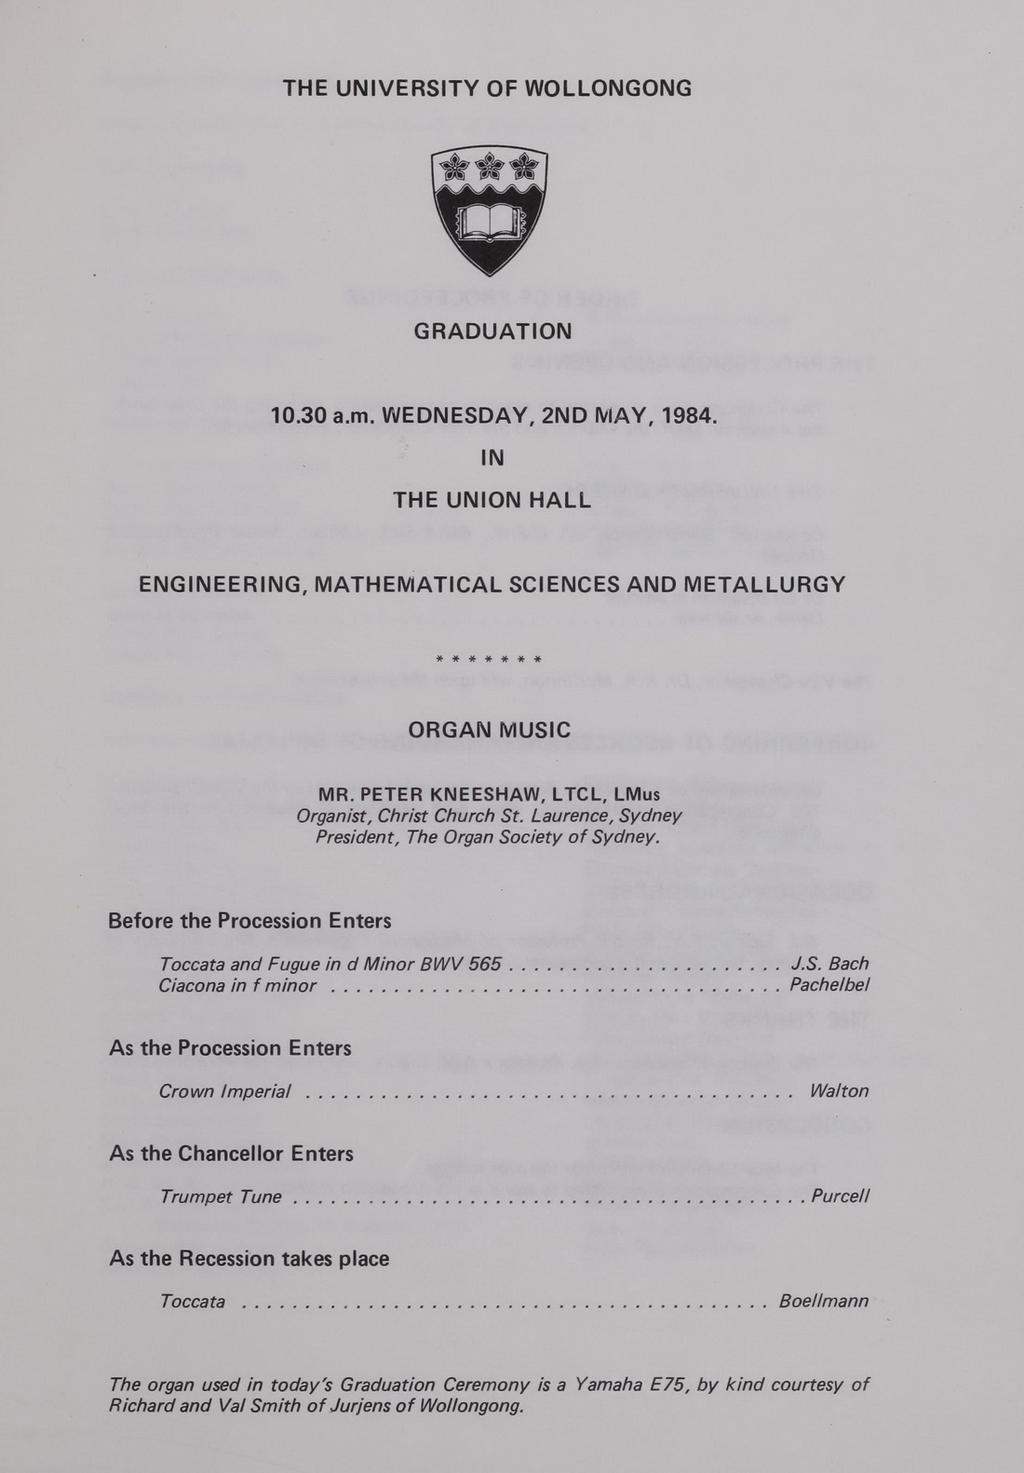 THE UNIVERSITY OF WOLLONGONG GRADUATION 10.30 a.m. WEDNESDAY, 2ND I'vIAY, 1984. IN THE UNION HALL ENGINEERING, MATHEMATICAL SCIENCES AND METALLURGY... ORGAN MUSIC M A. PETER KNEESHAW.